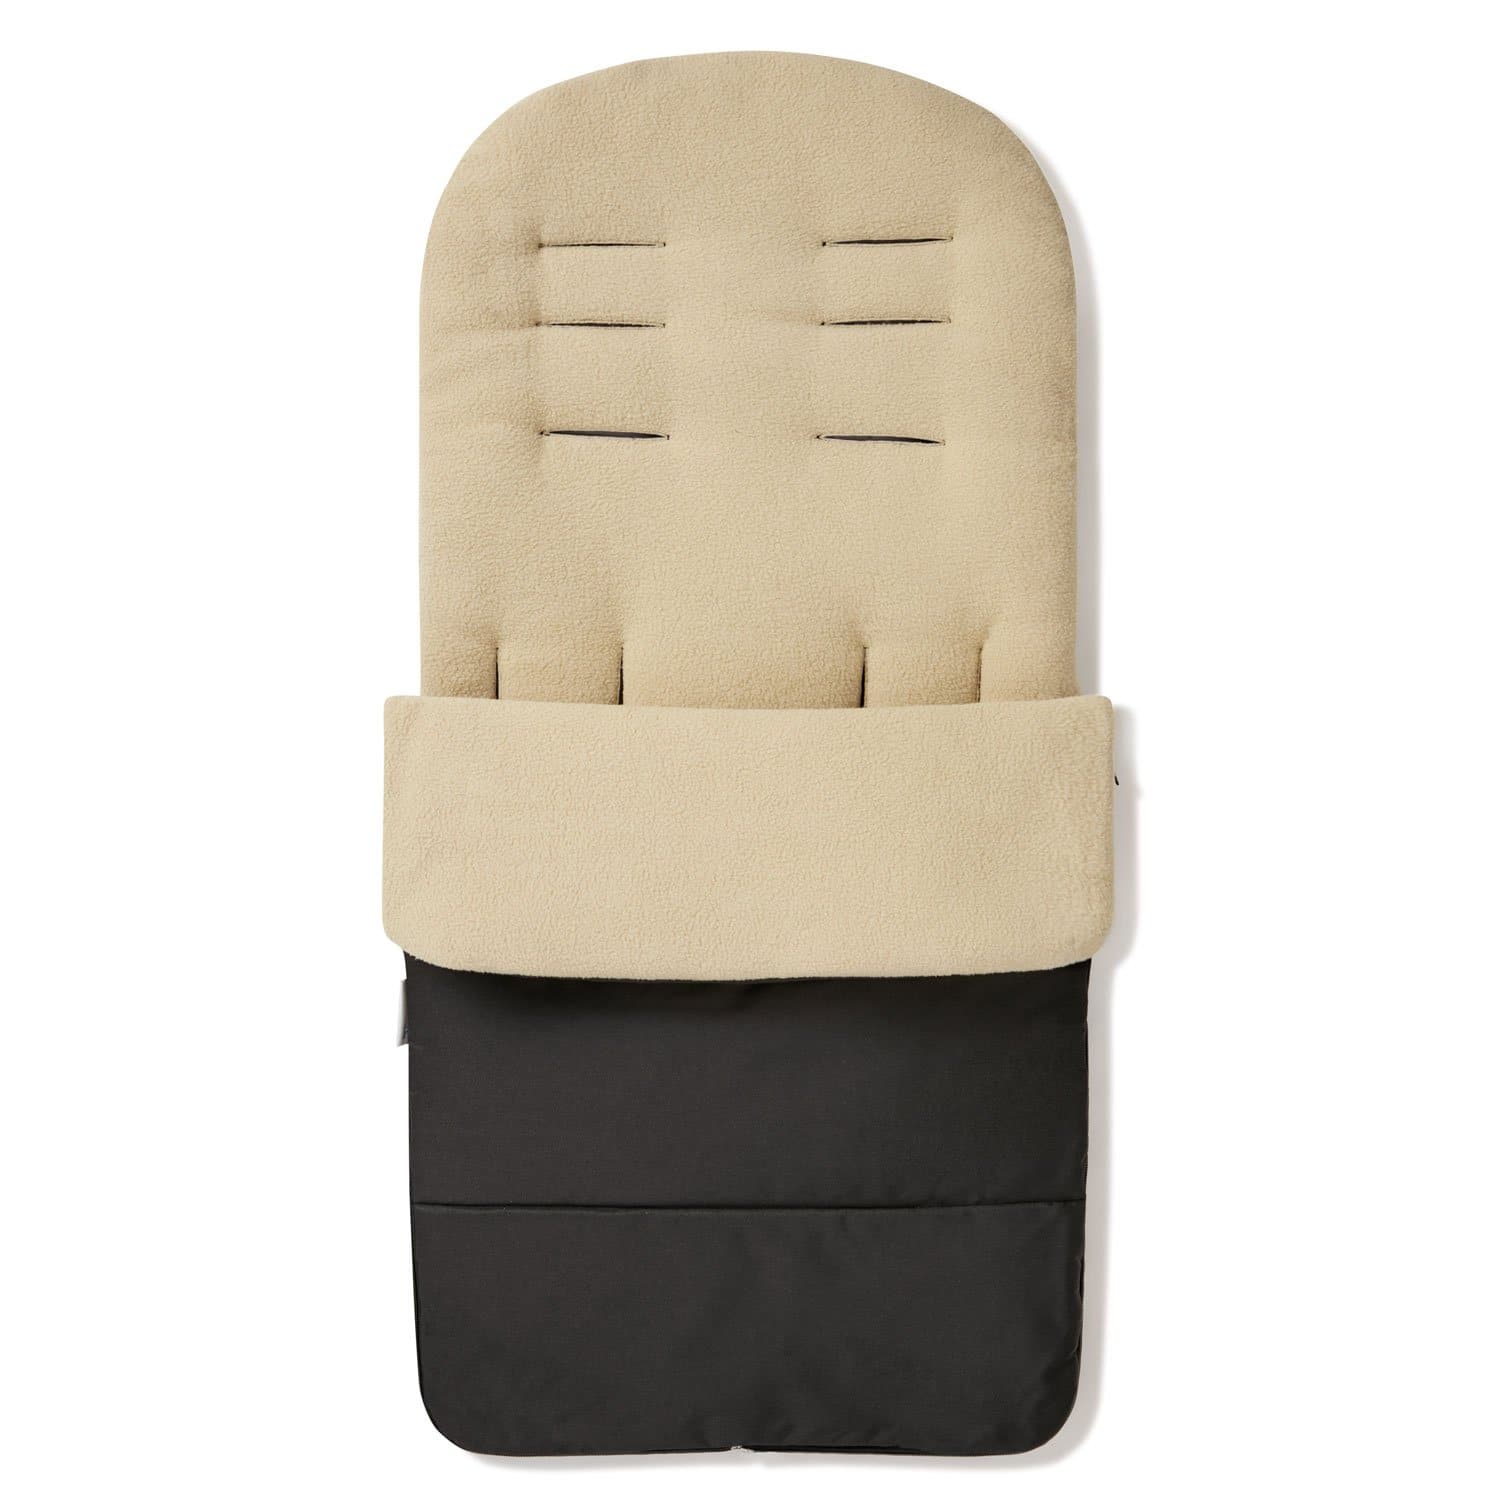 Premium Footmuff / Cosy Toes Compatible with Jane - Desert Sand / Fits All Models | For Your Little One